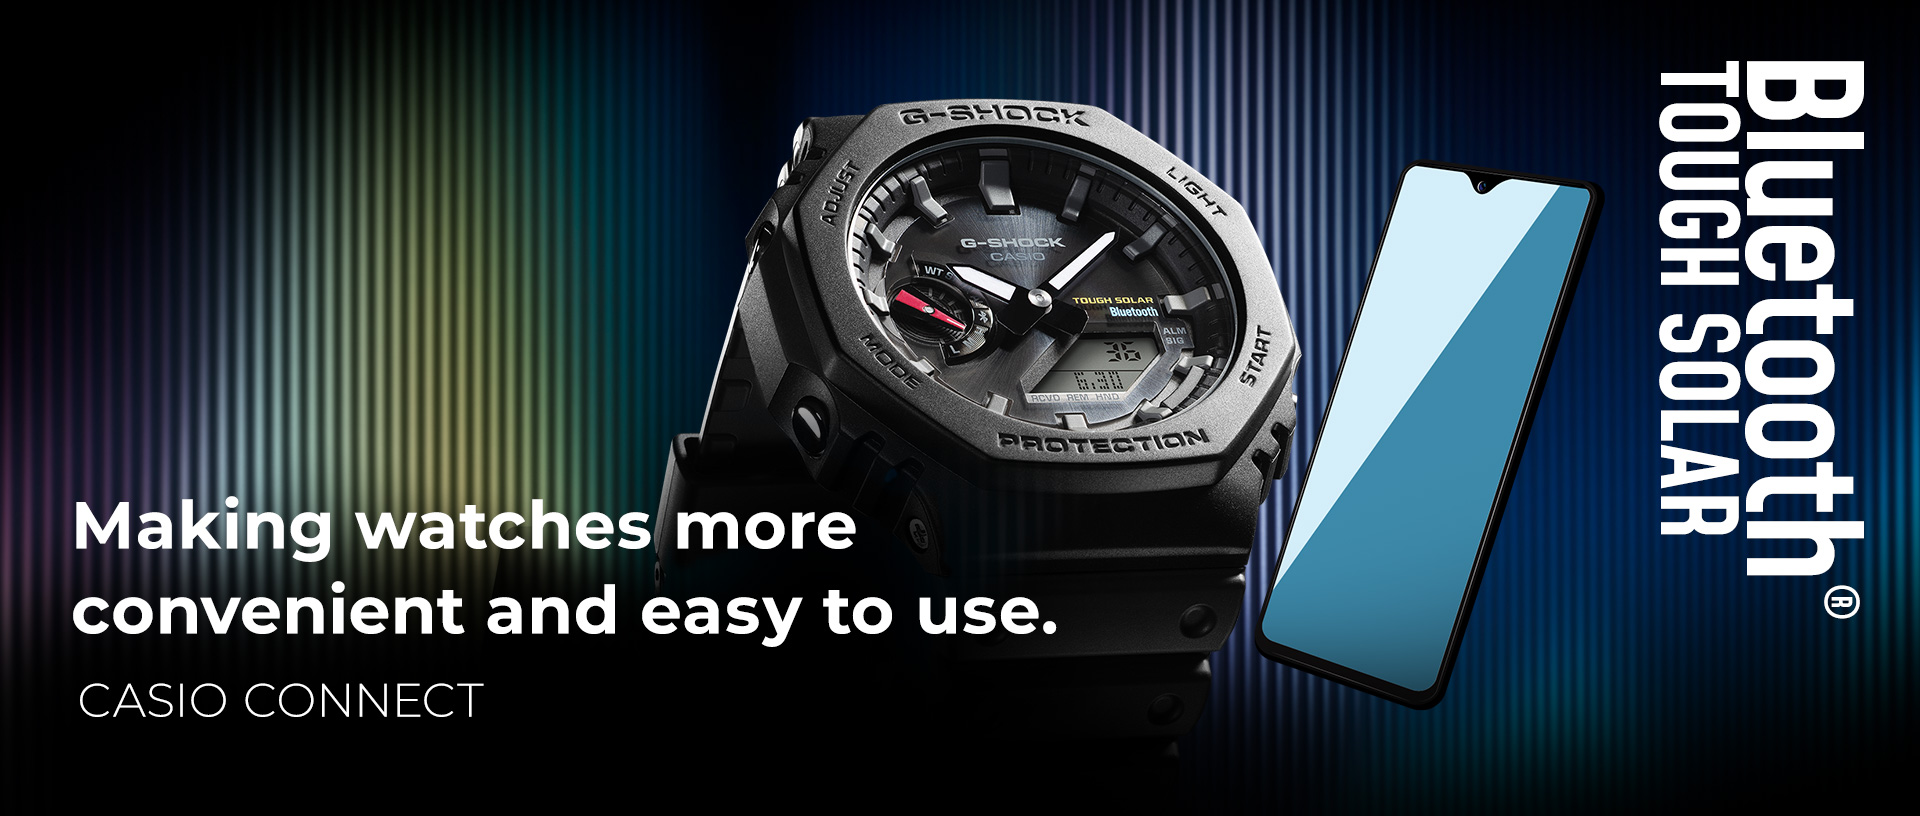 Making watches more convenient and easy to use.  CASIO CONNECT